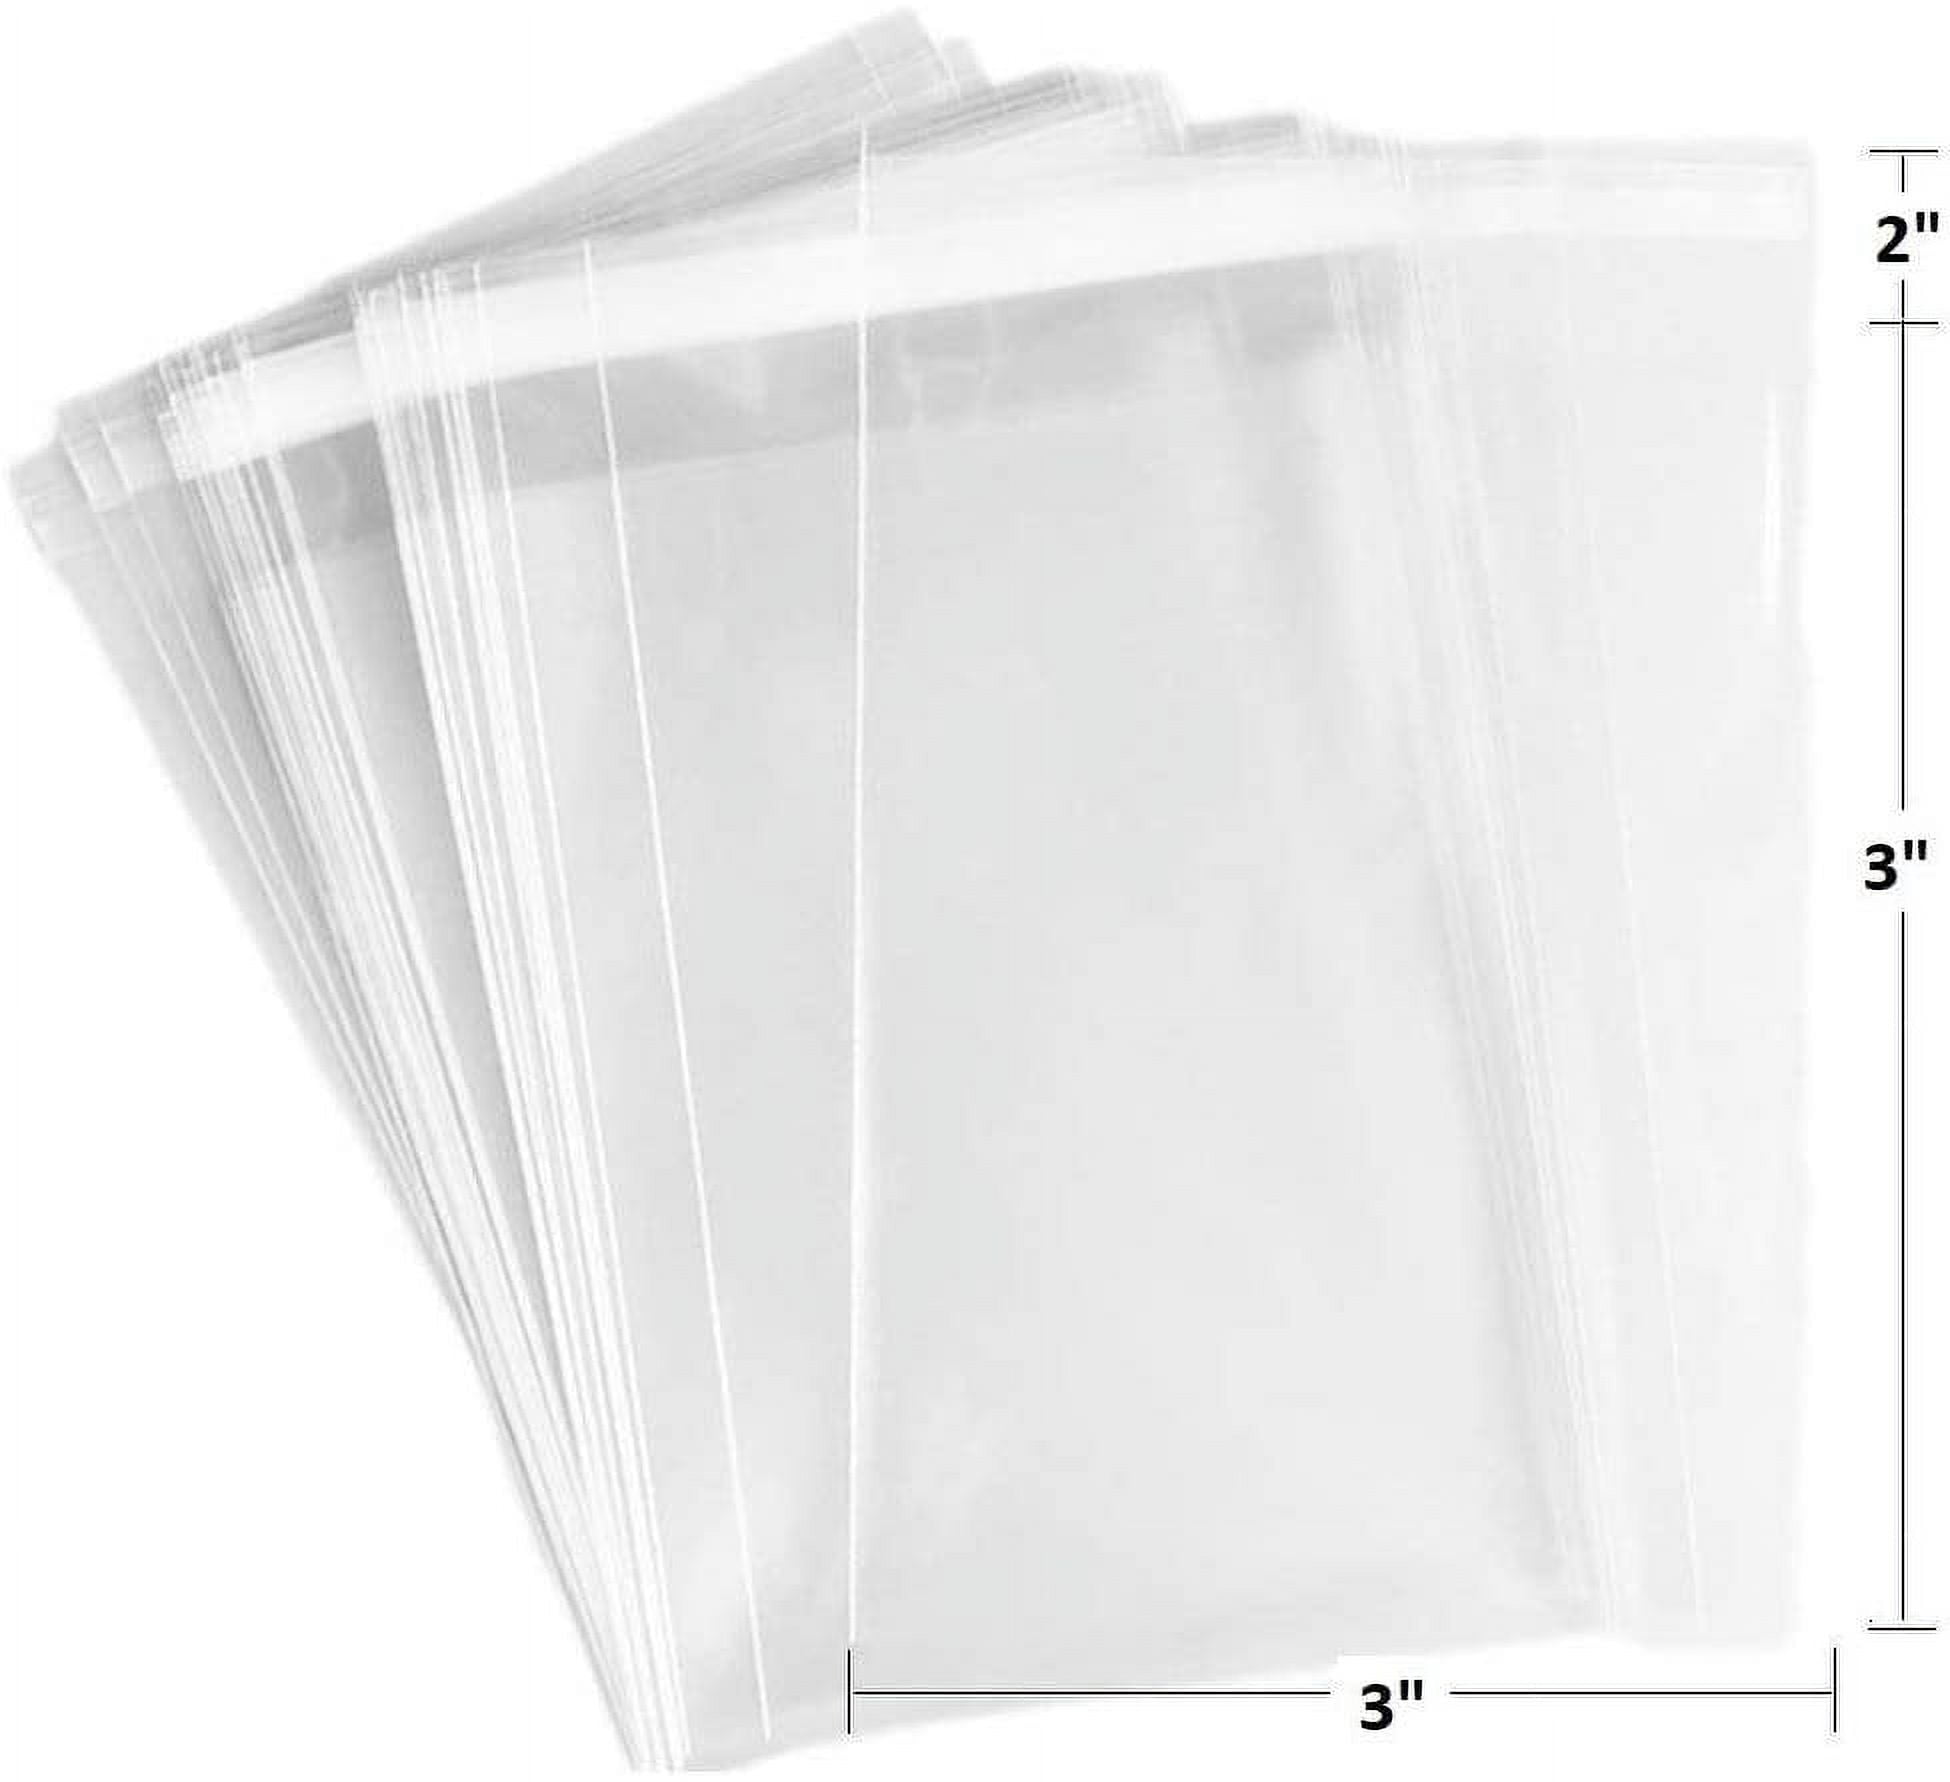 Premium 3 x 4 in (200 Count) Small Poly Zipper Bags, 2mil Small Plastic Bags Clear, Easy Zip Open & Close, Zip Poly Bags Strong Locking Seal, Food